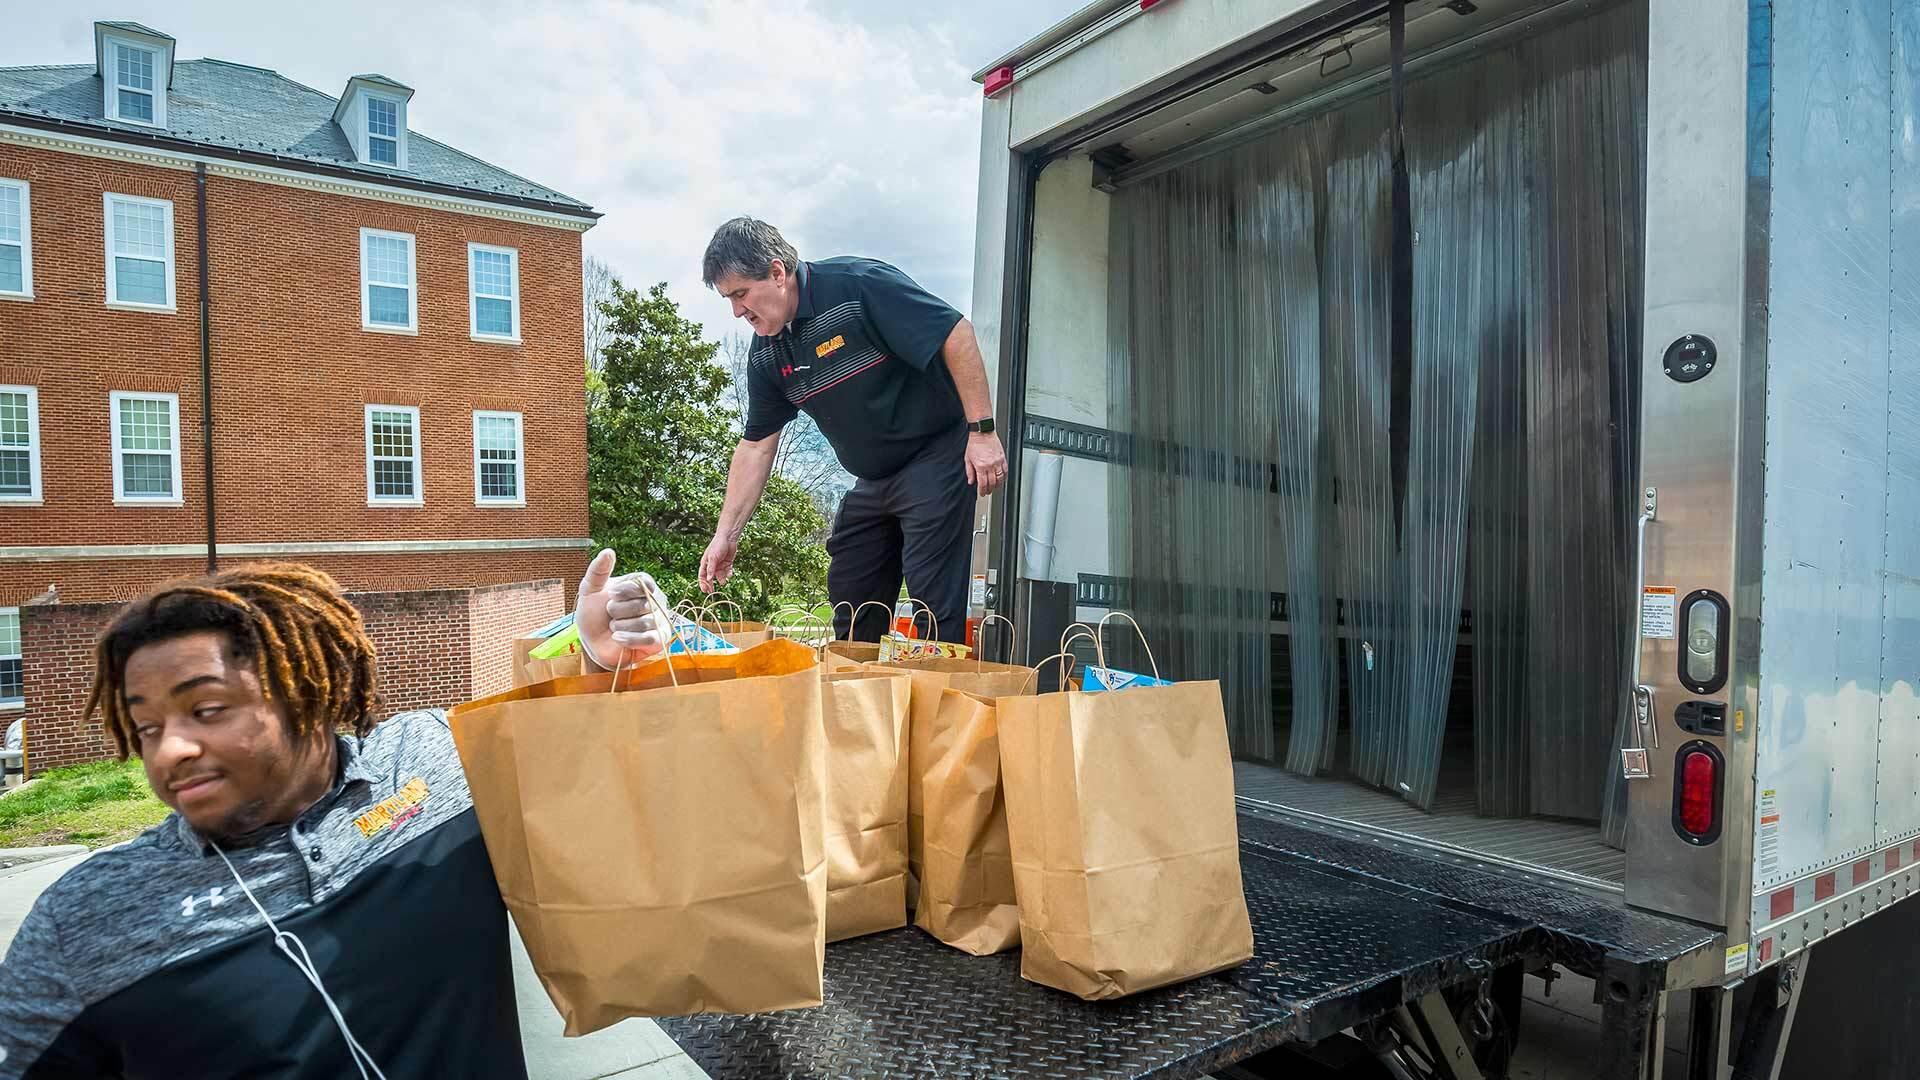 Two people unload bags of groceries from the back of a large shipping truck